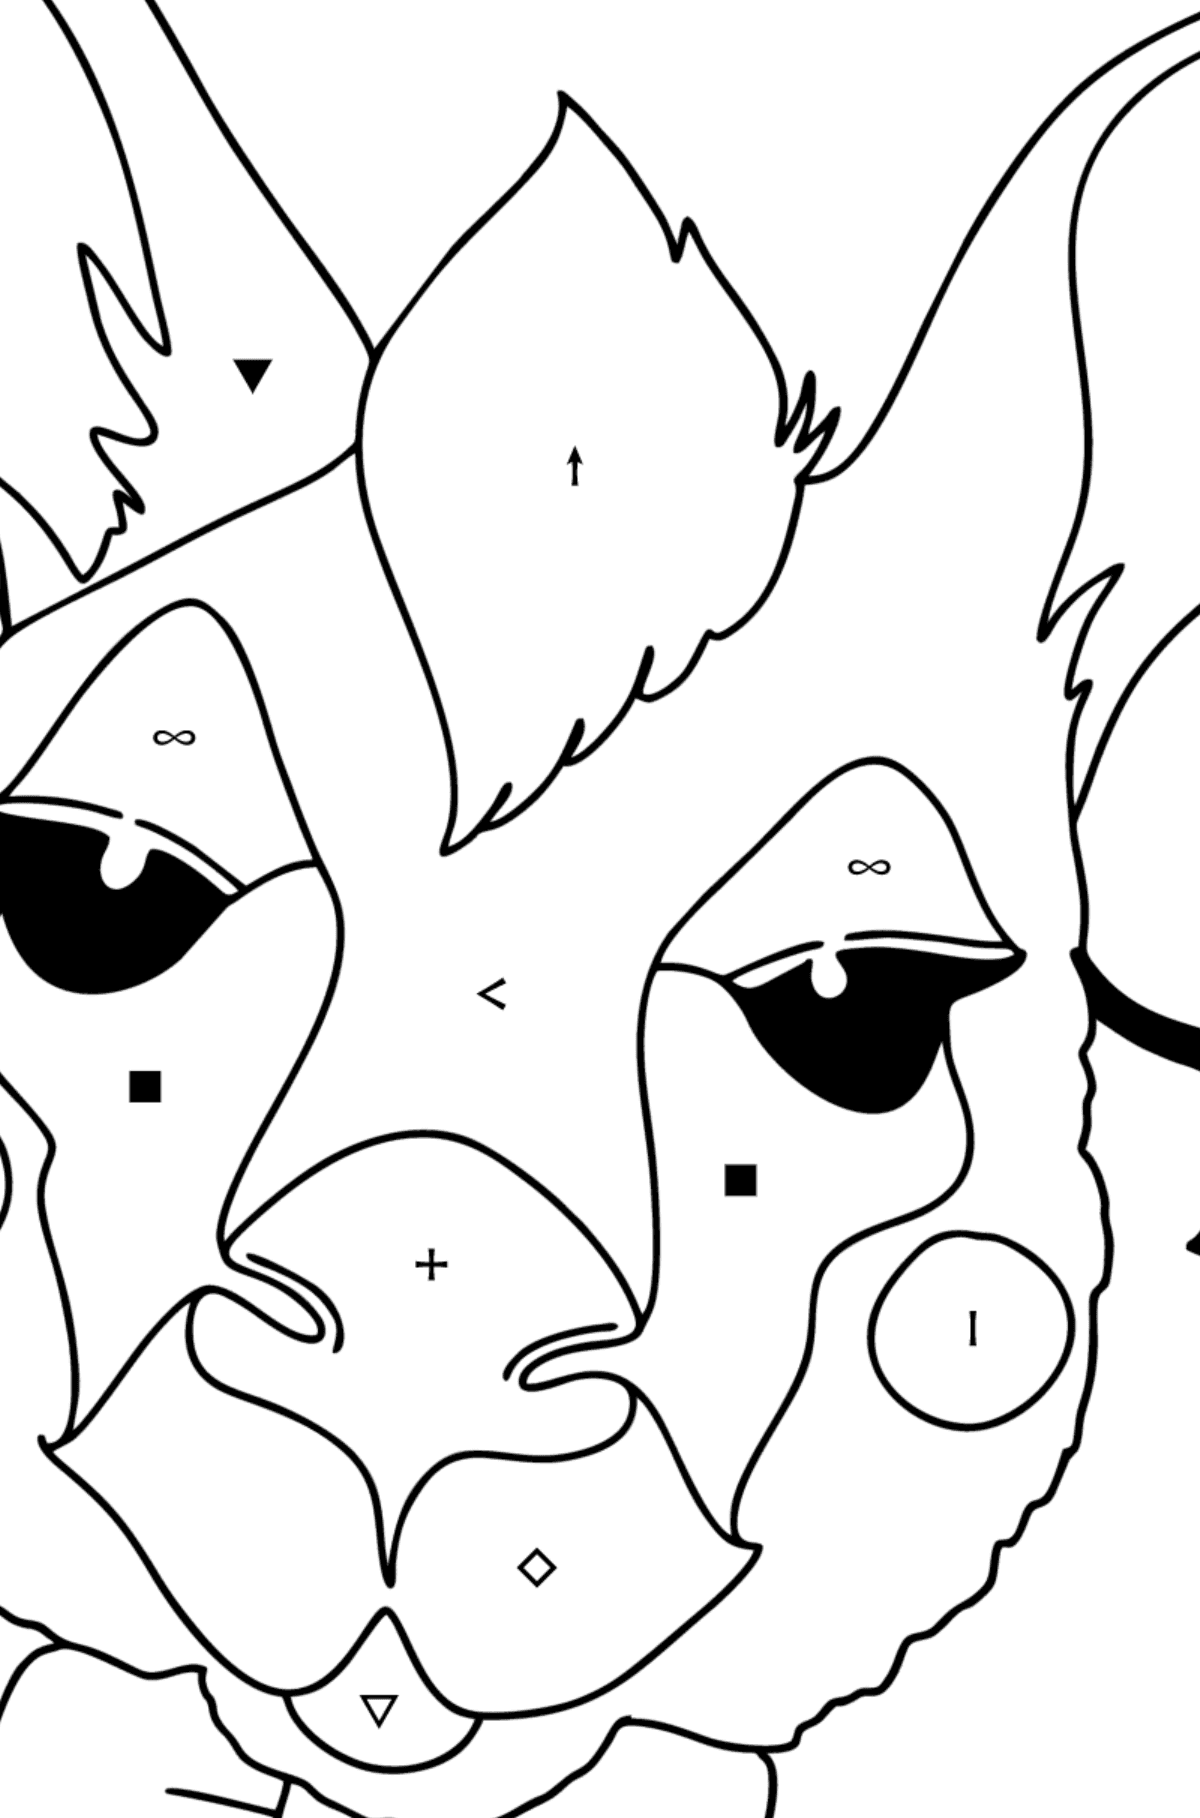 Kangaroo Mask coloring page - Coloring by Symbols for Kids